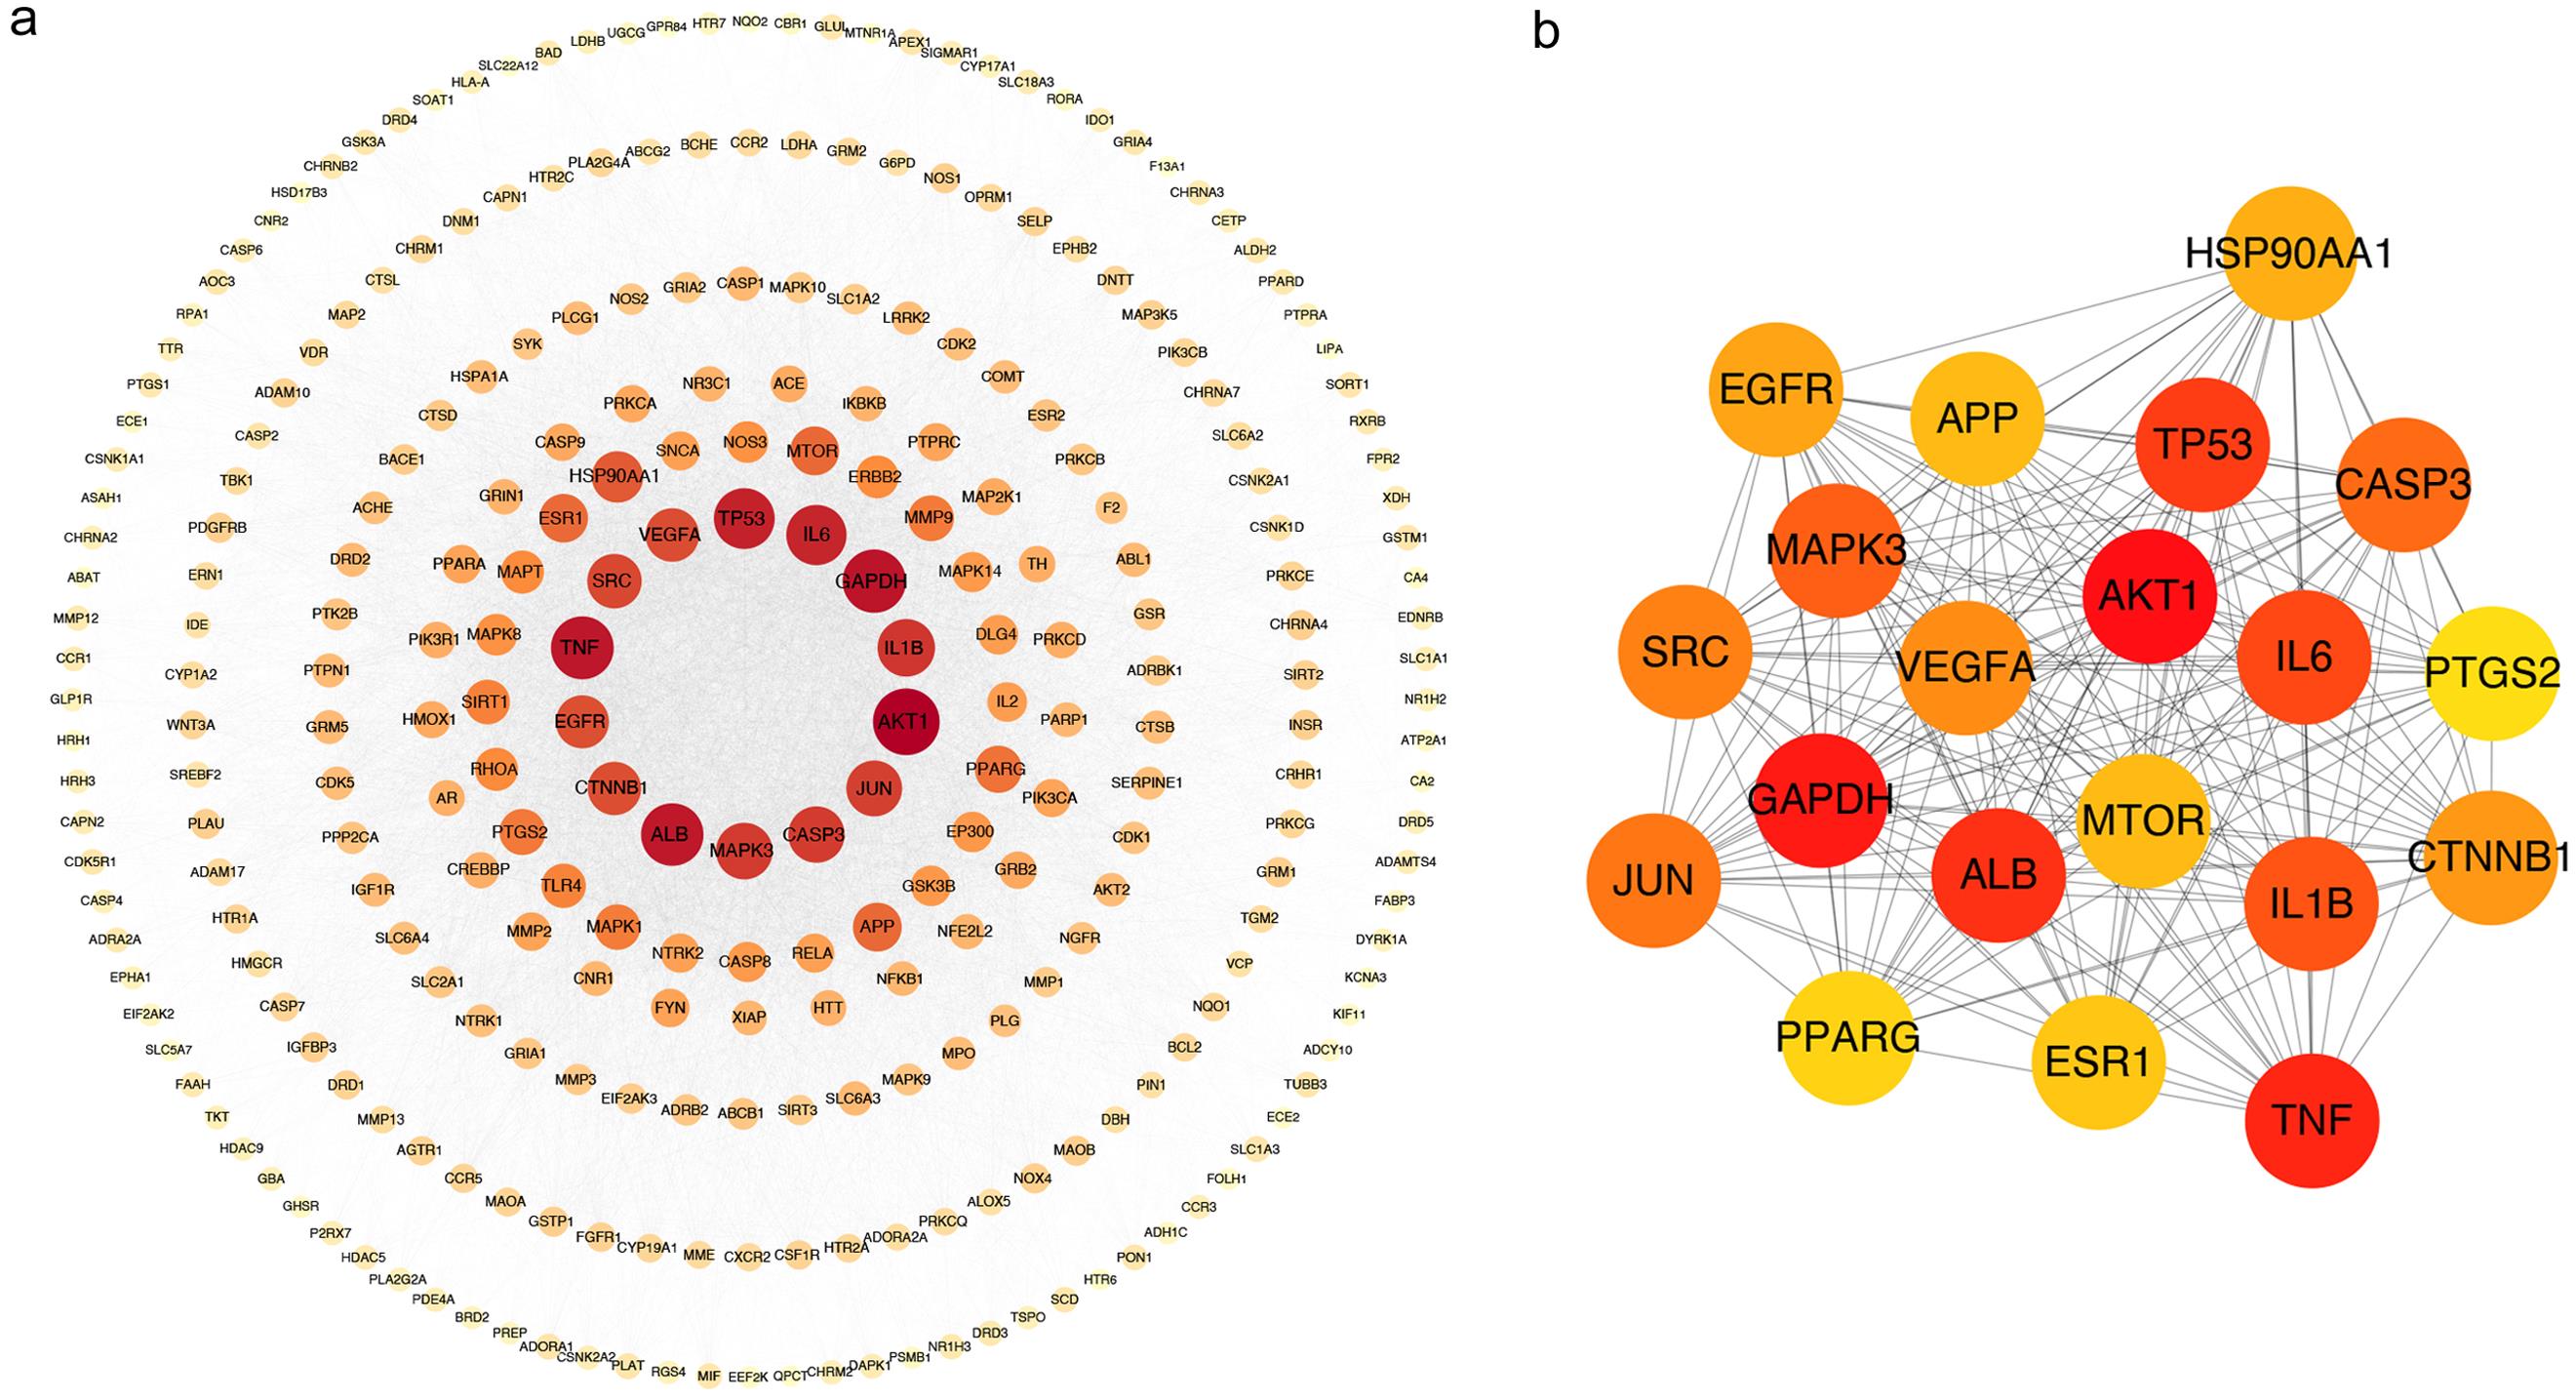 The protein-protein interaction network of potential targets.